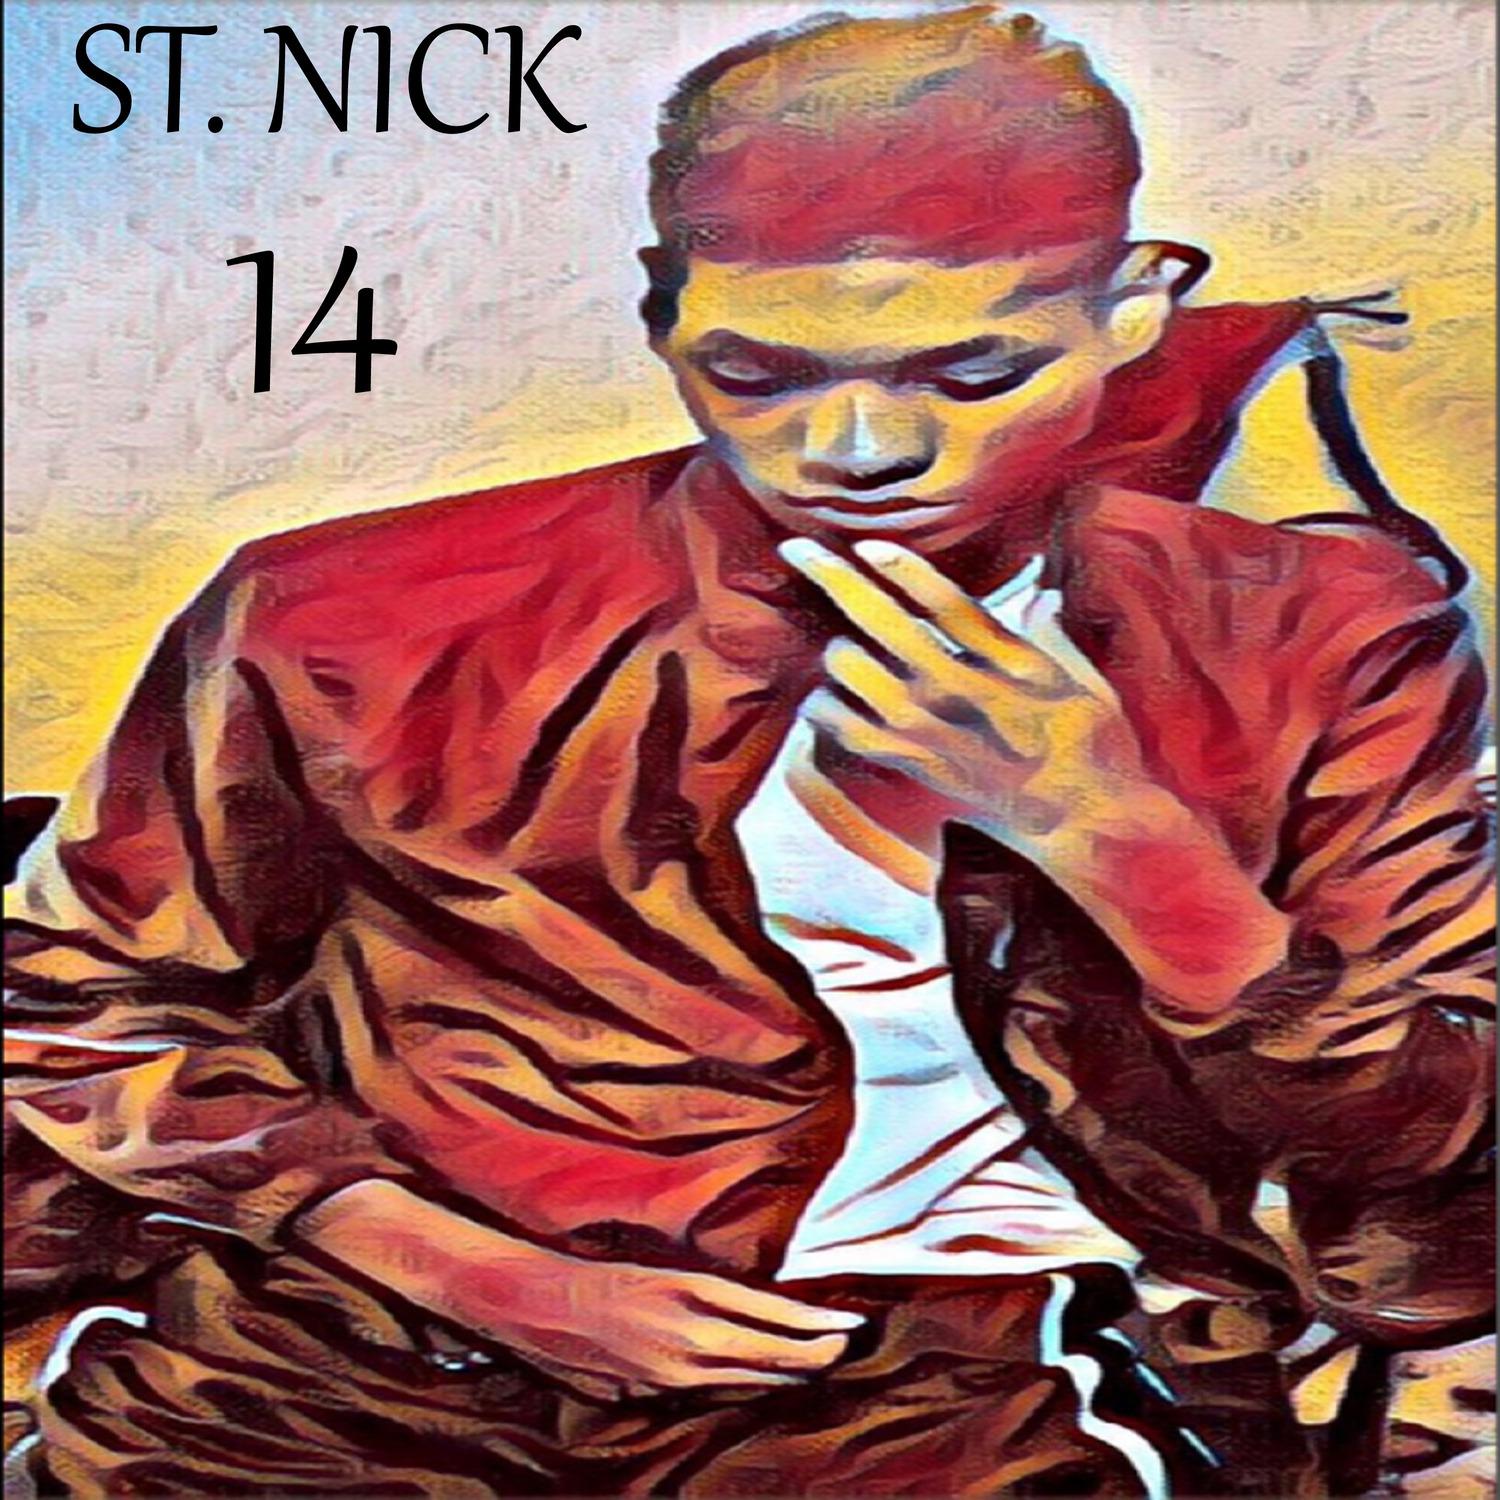 St. Nick - Not the Same